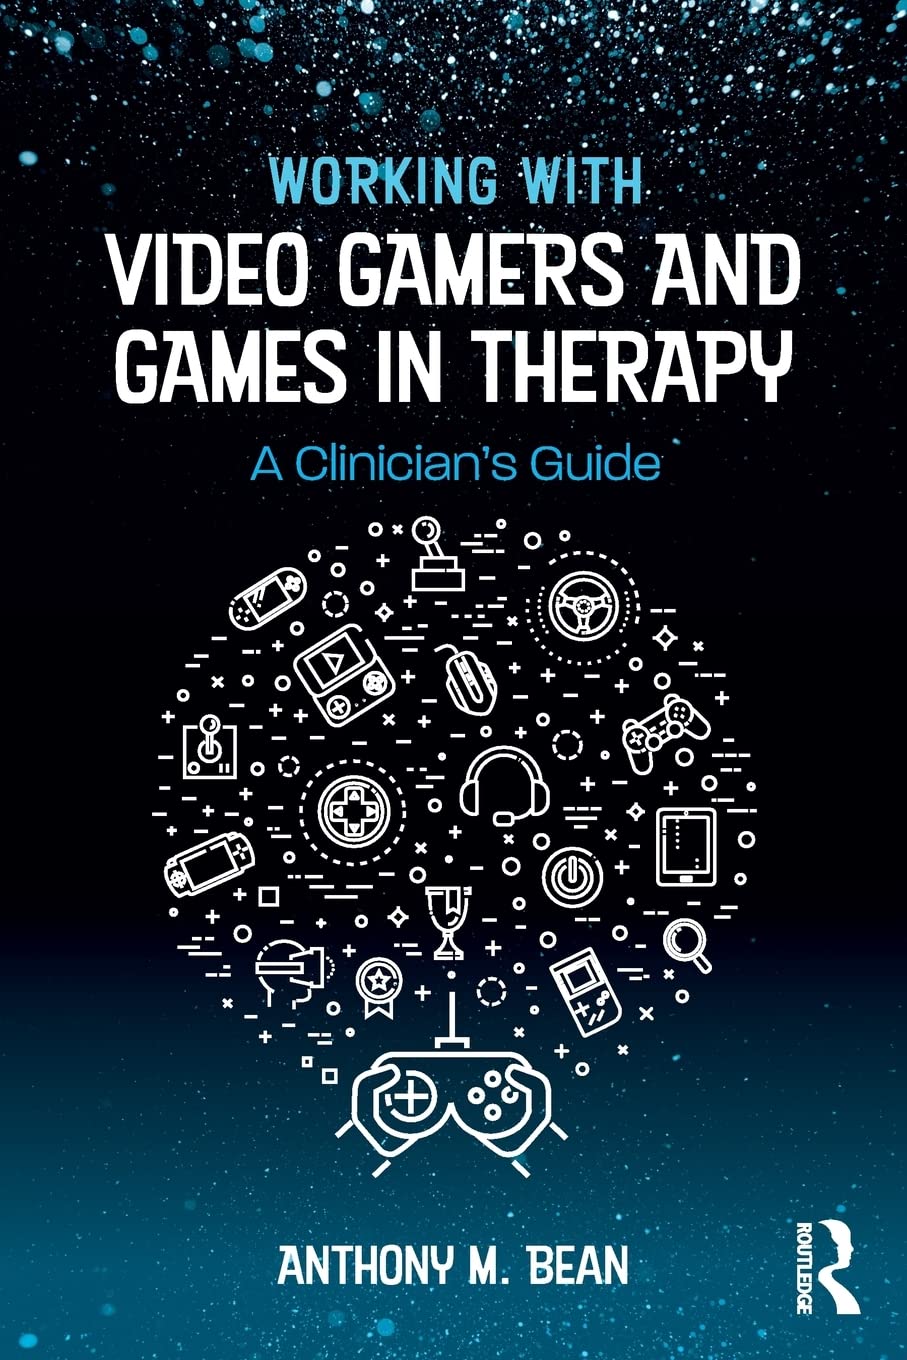 Working with Video Gamers and Games in Therapy: A Clinician's Guide